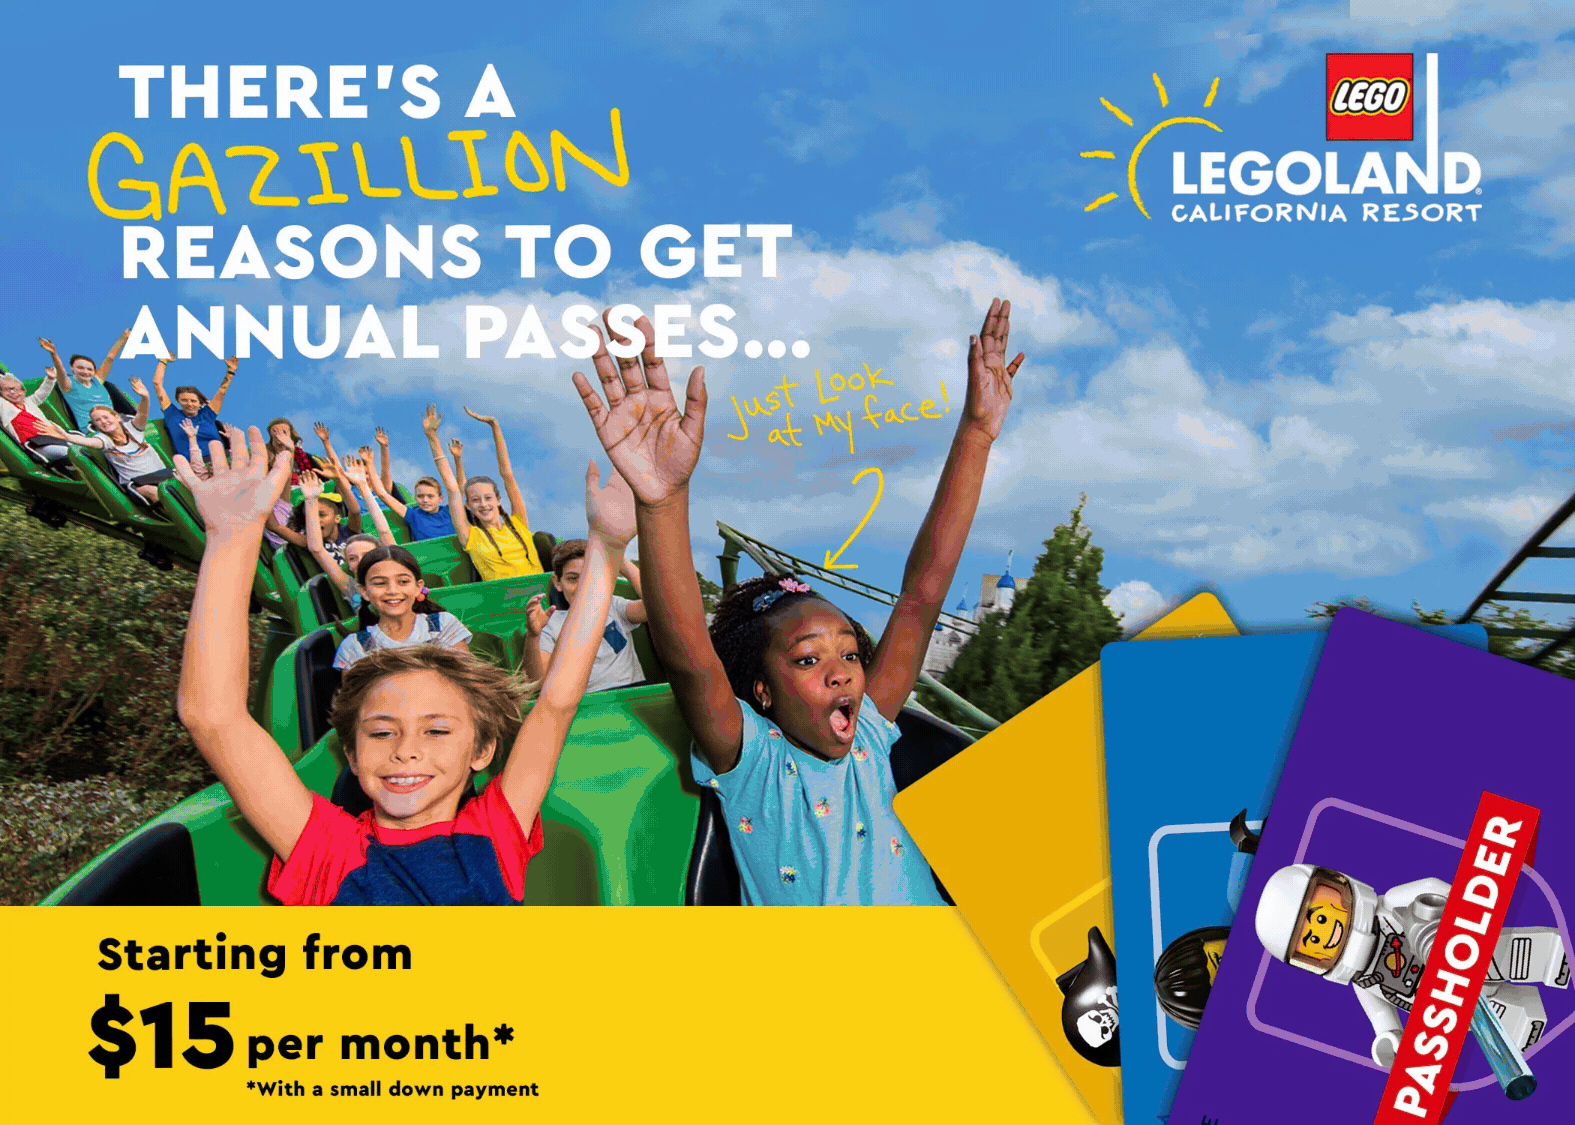 Annual Passes Starting from $15 per month